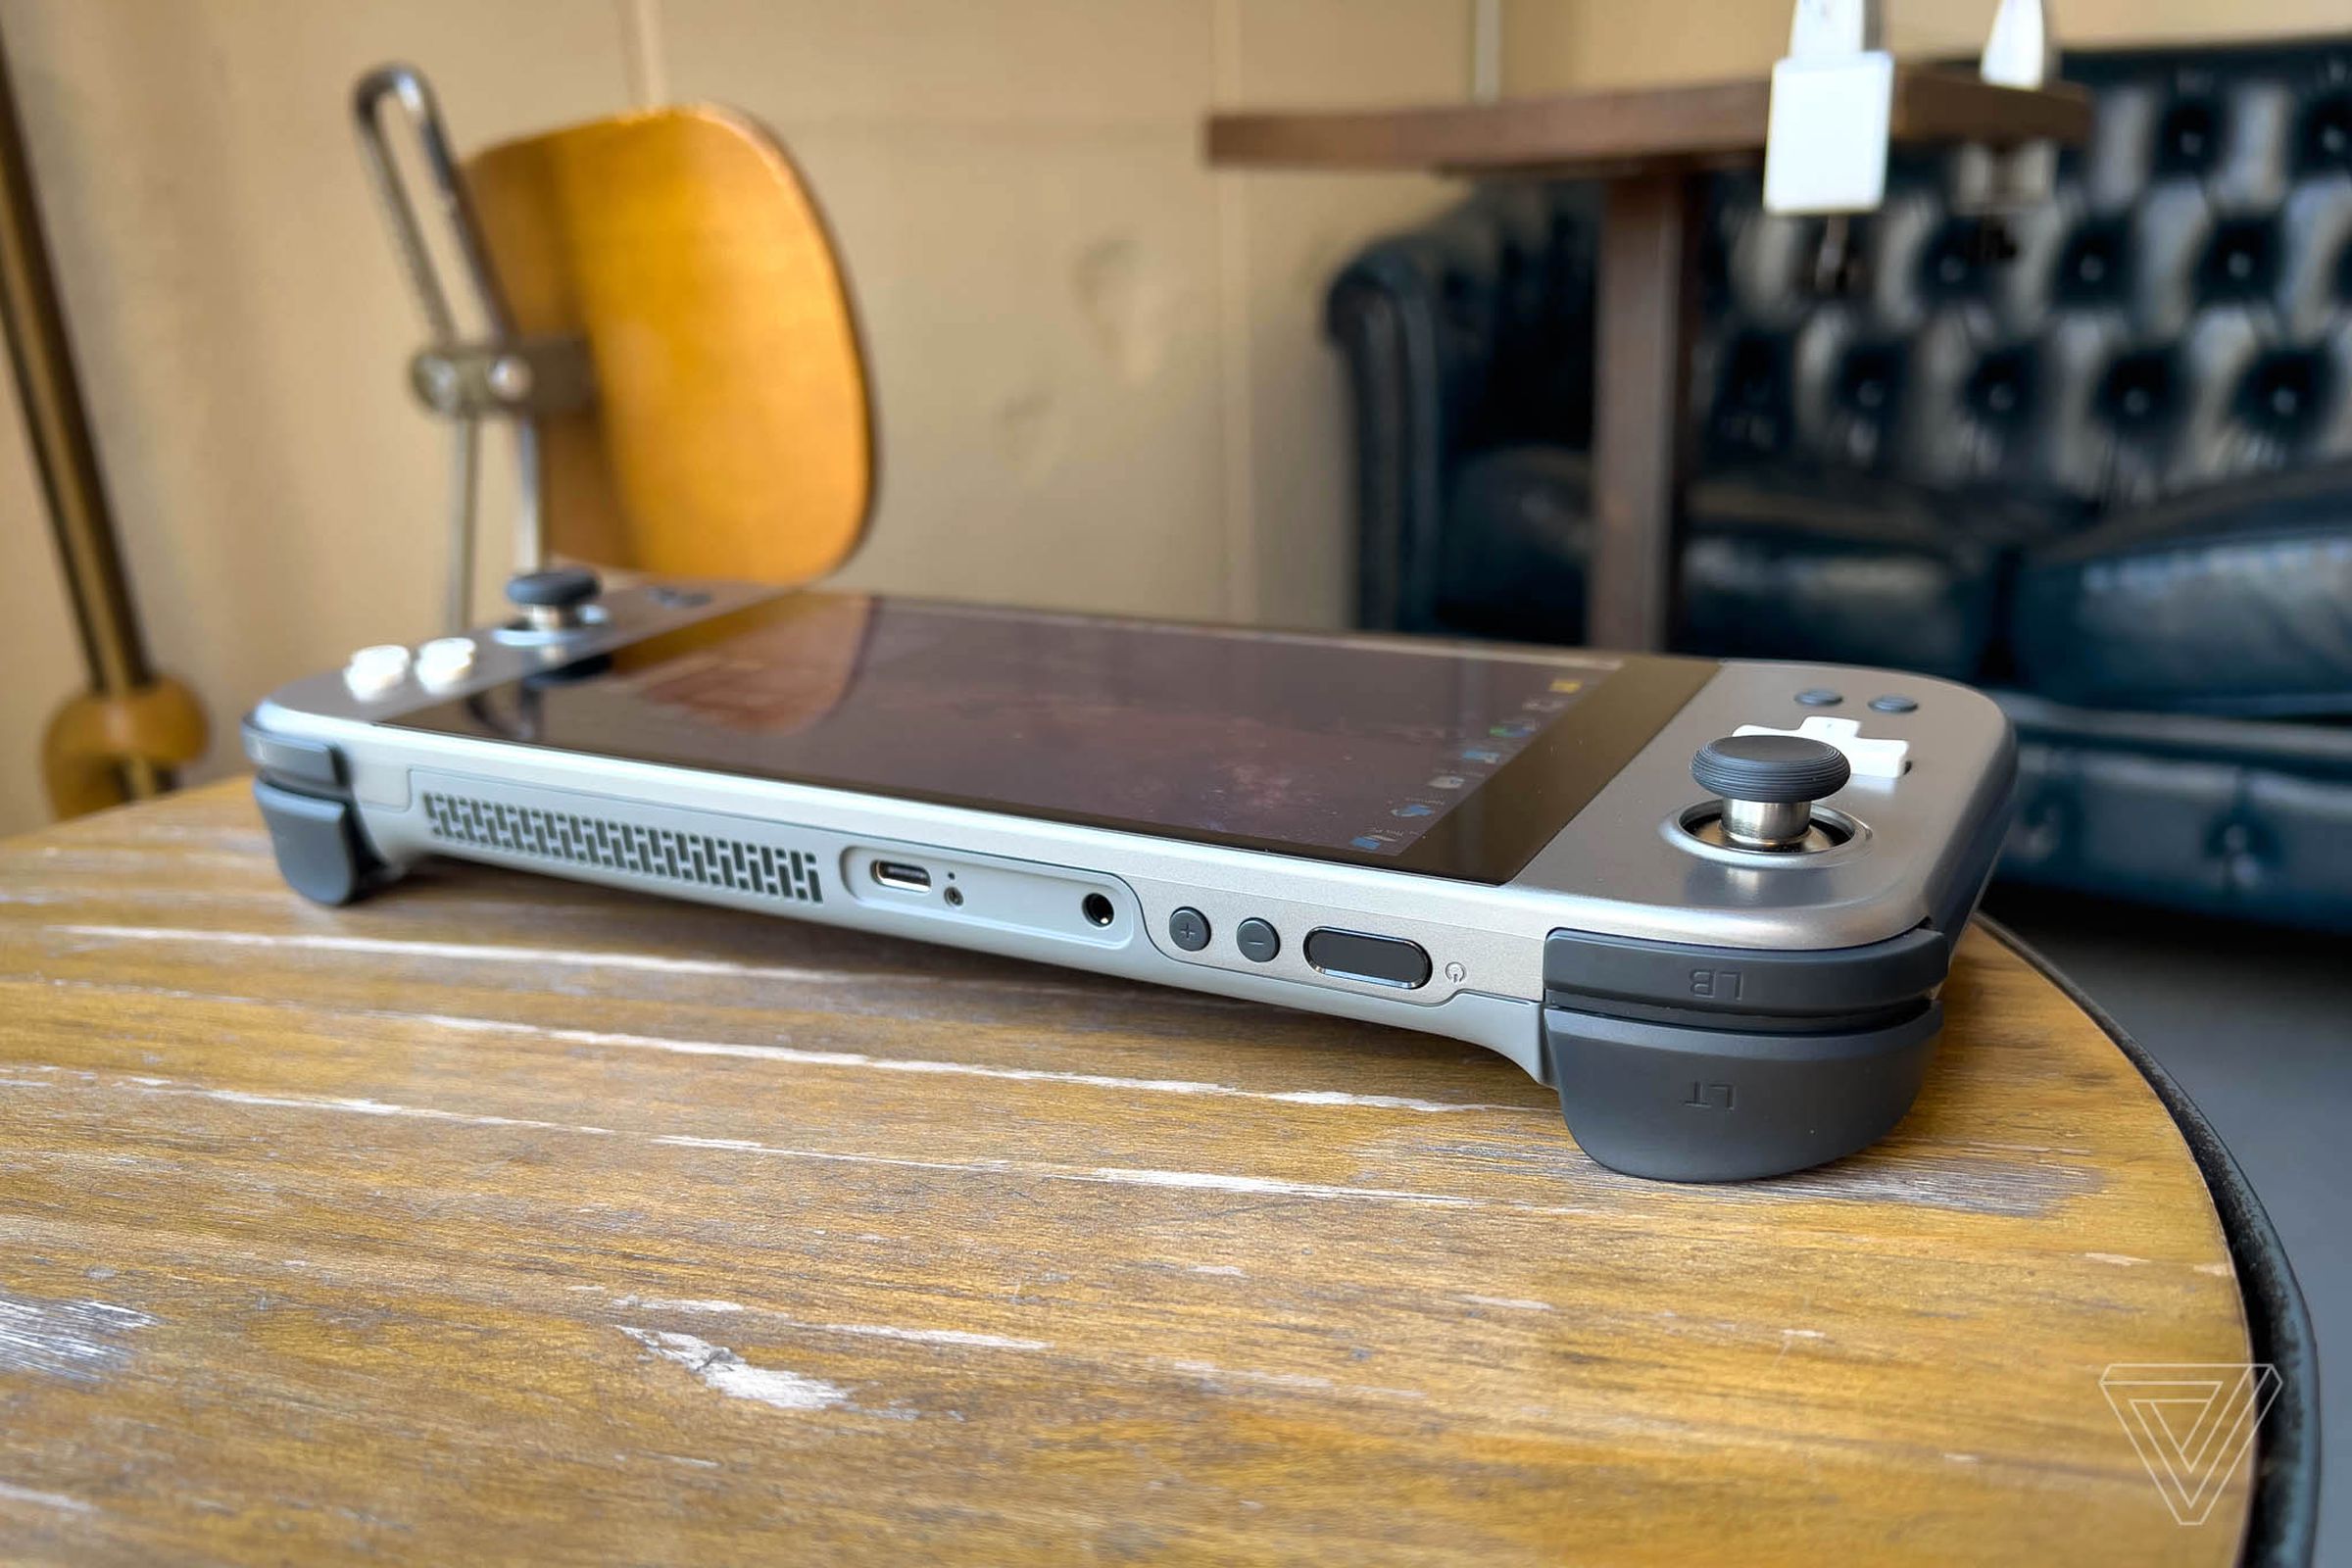 There’s a USB-C port up top as well as on the bottom. You’ll also see the headphone jack, volume buttons, fan exhaust, and sleep/wake button with an integrated fingerprint sensor.